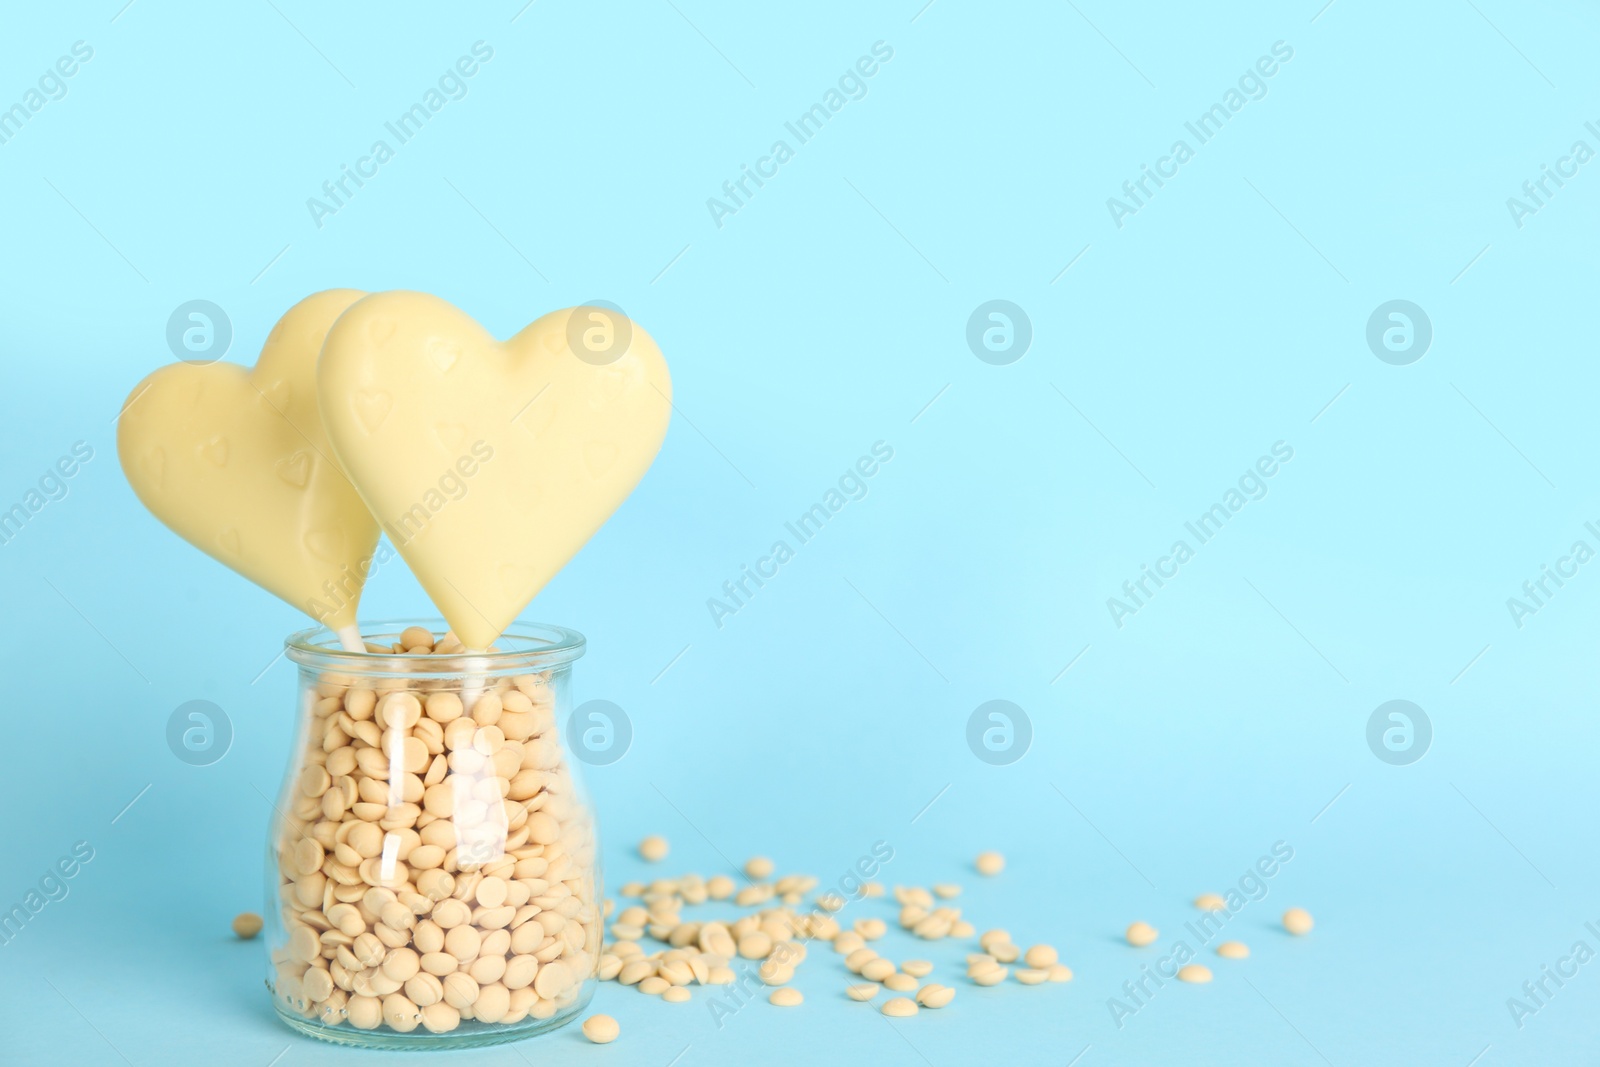 Photo of Chocolate heart shaped lollipops with chips in glass jar on turquoise background. Space for text